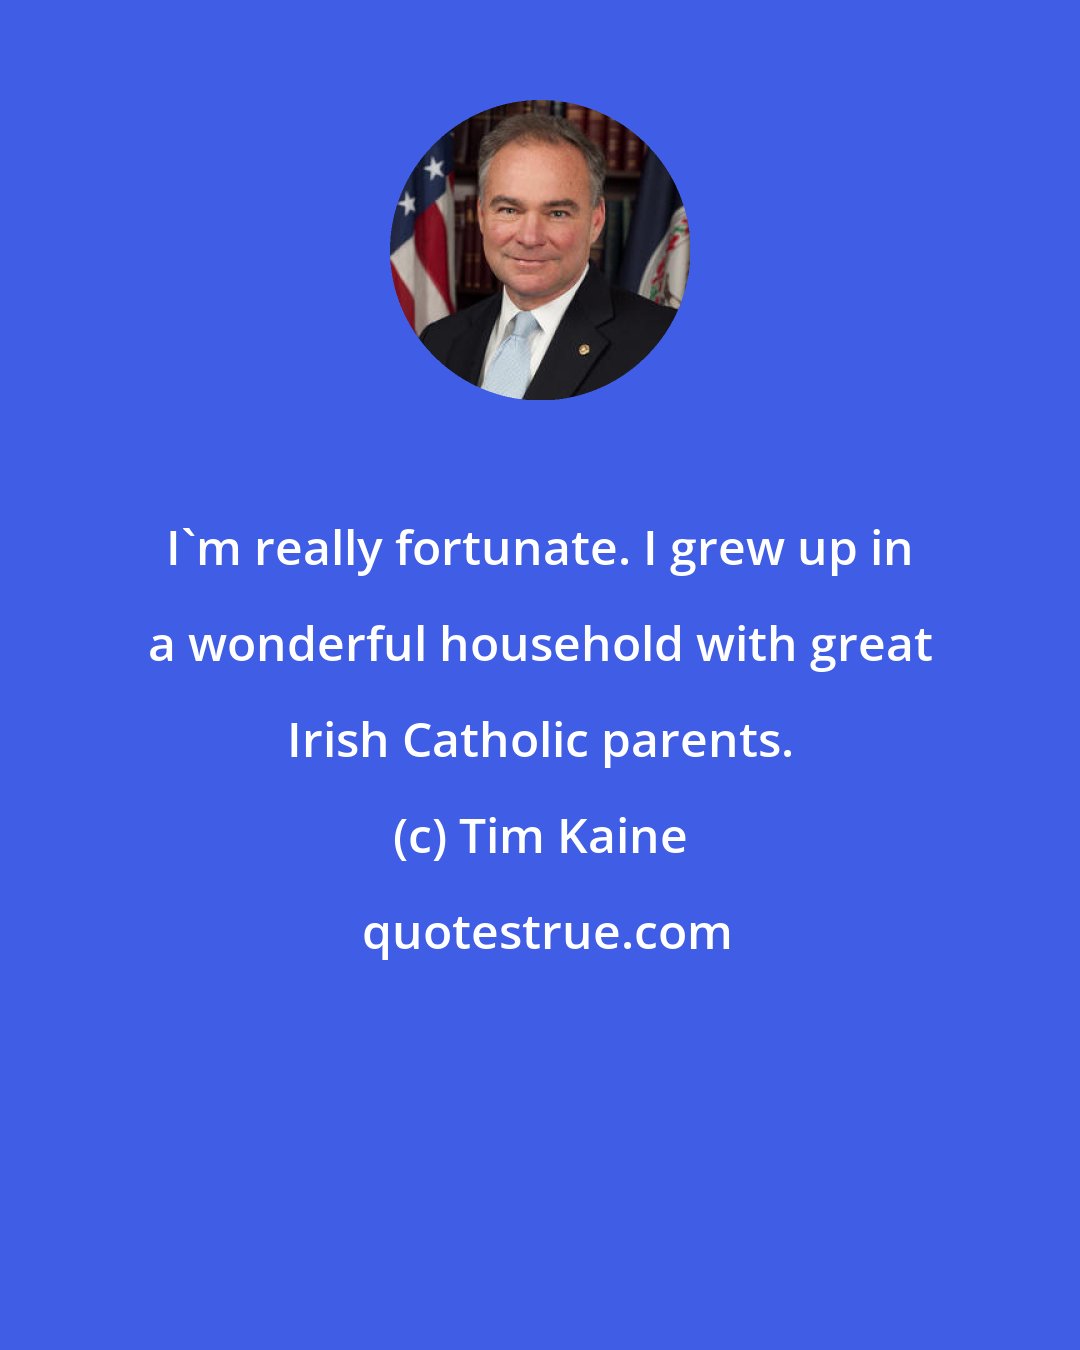 Tim Kaine: I'm really fortunate. I grew up in a wonderful household with great Irish Catholic parents.